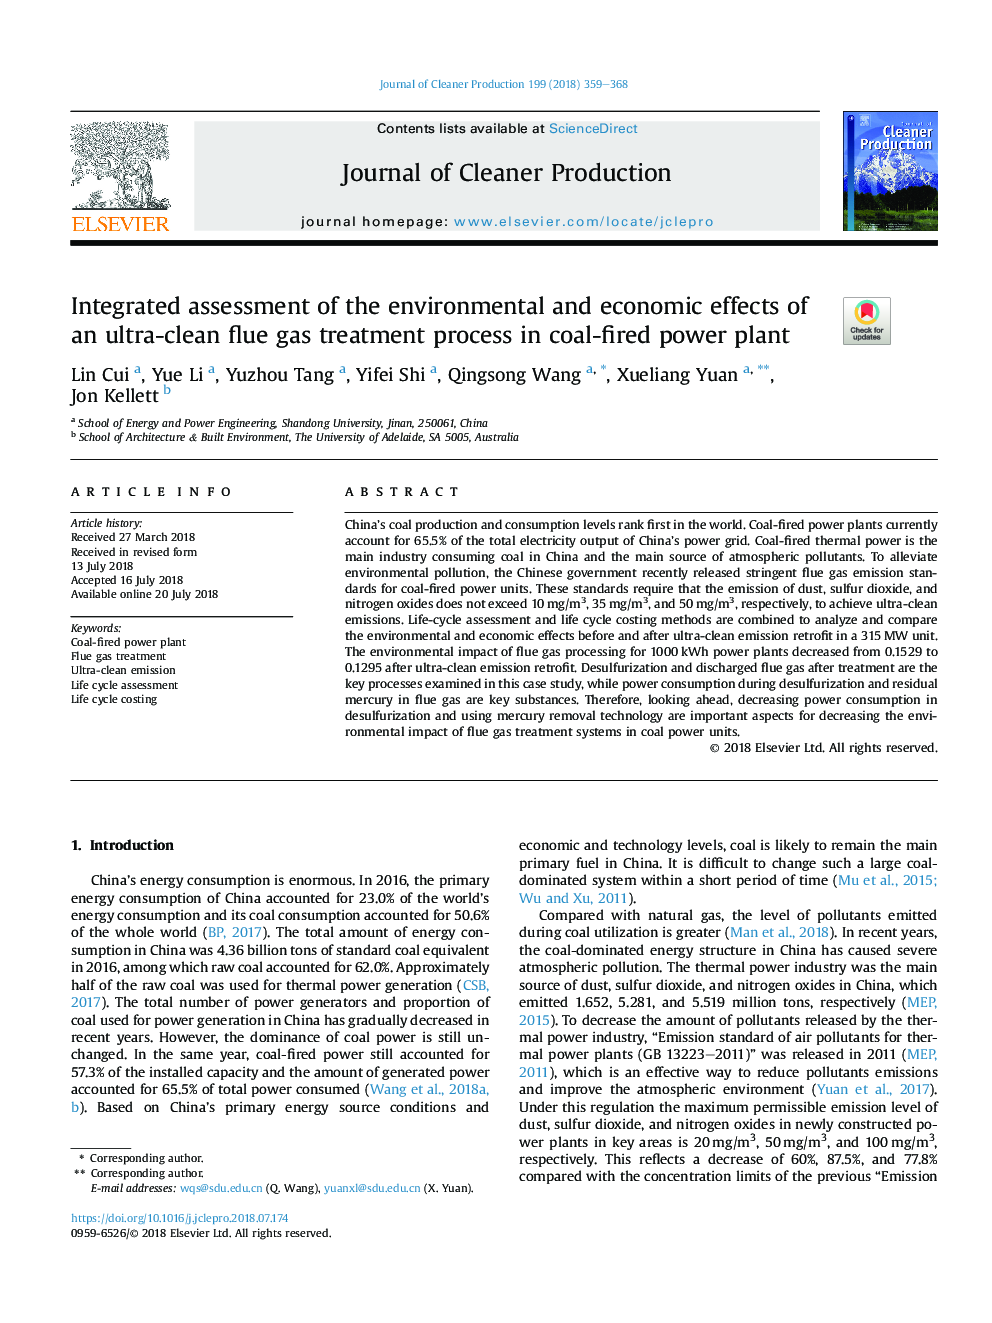 Integrated assessment of the environmental and economic effects of an ultra-clean flue gas treatment process in coal-fired power plant